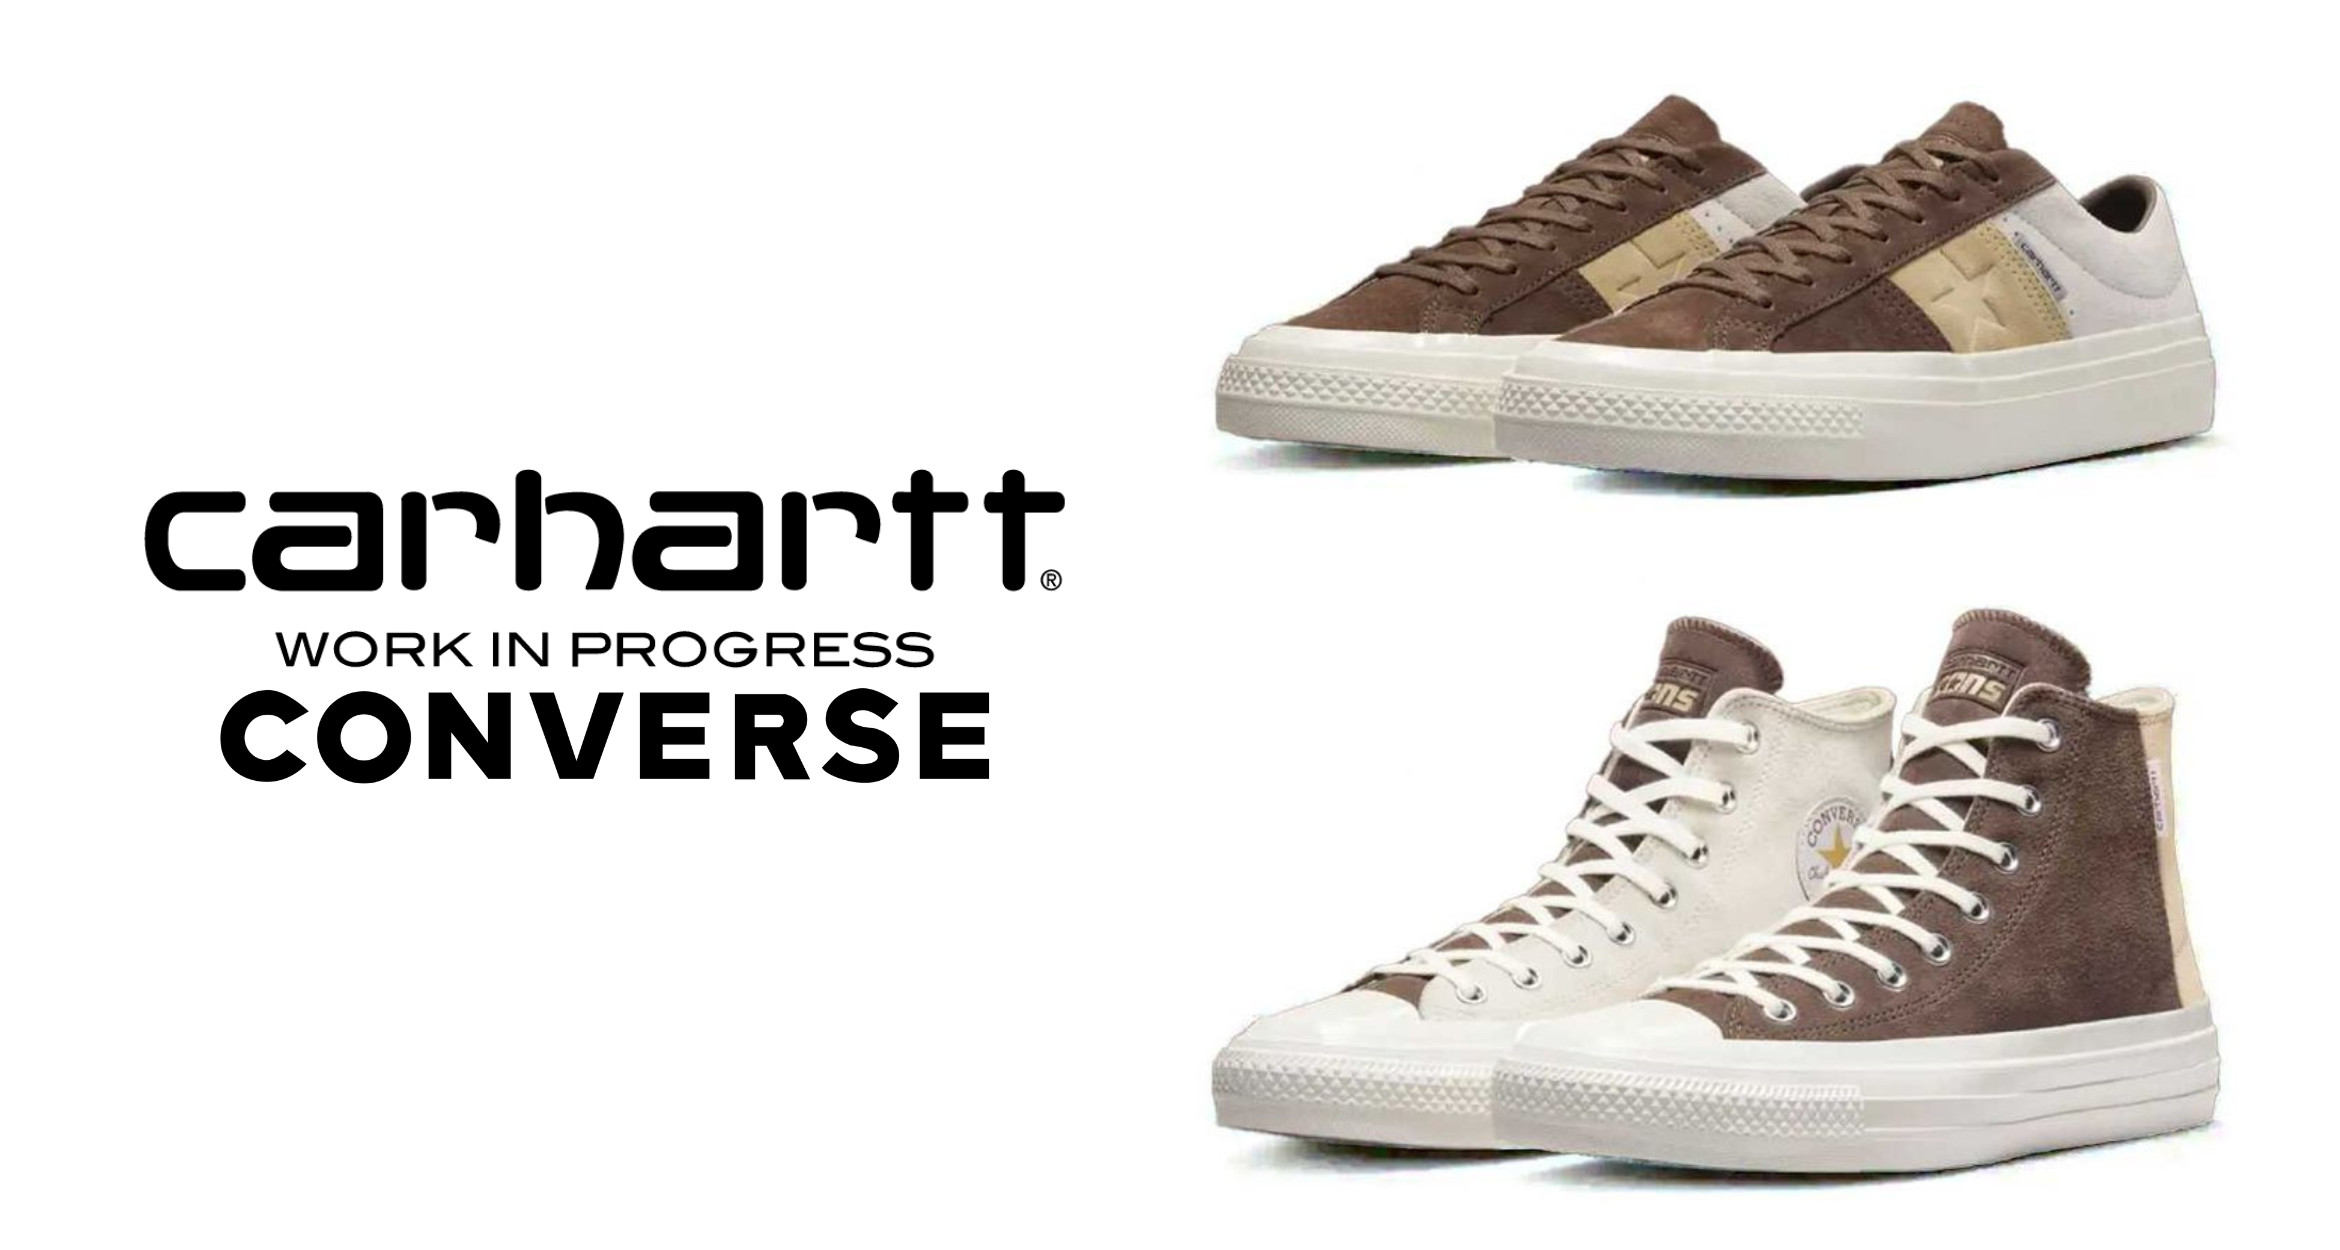 Coming Soon: Carhartt x Converse CONS Pack